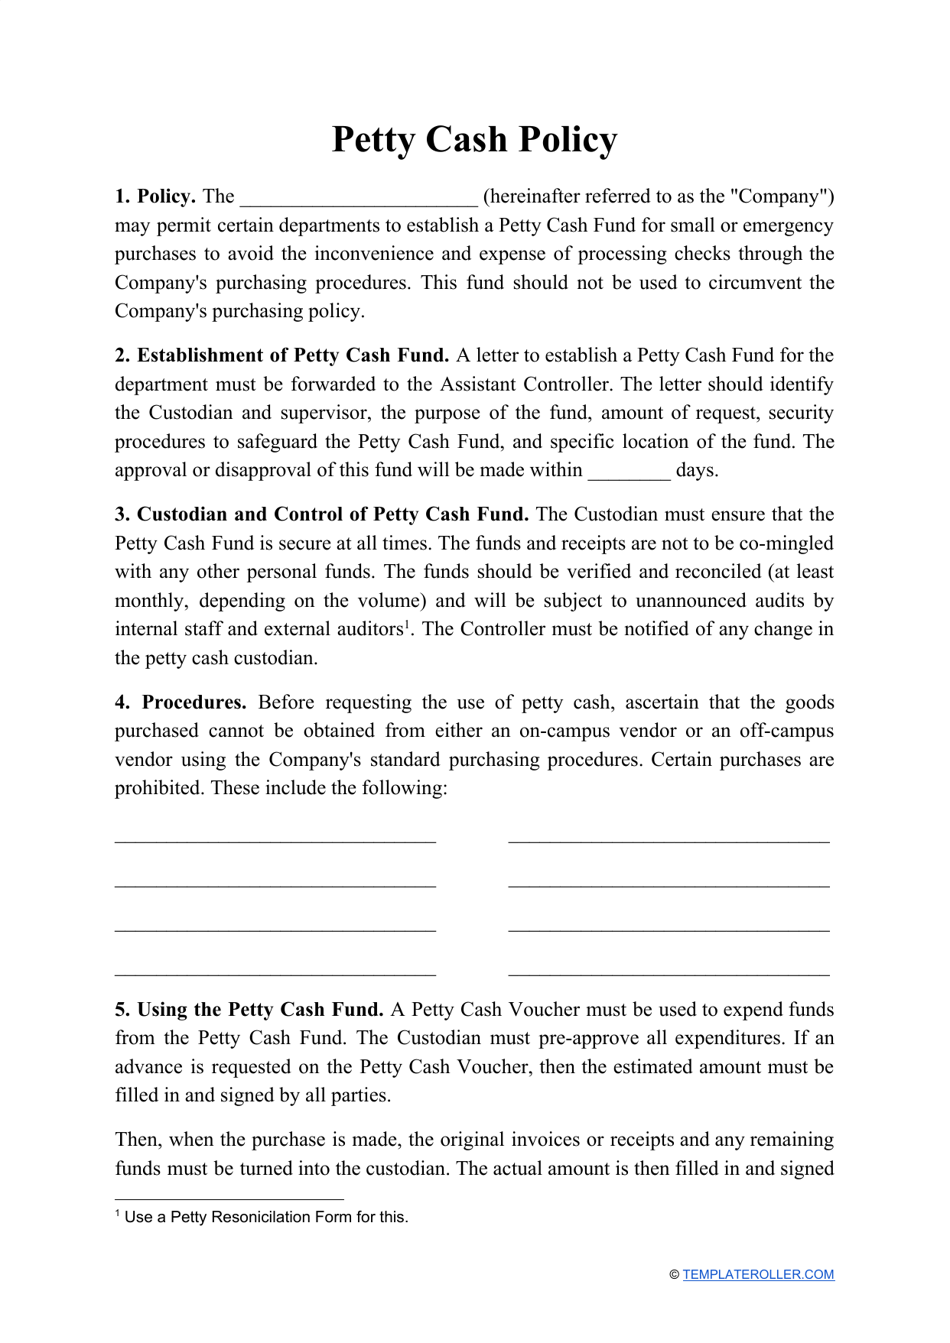 Petty Cash Policy Template, Page 1